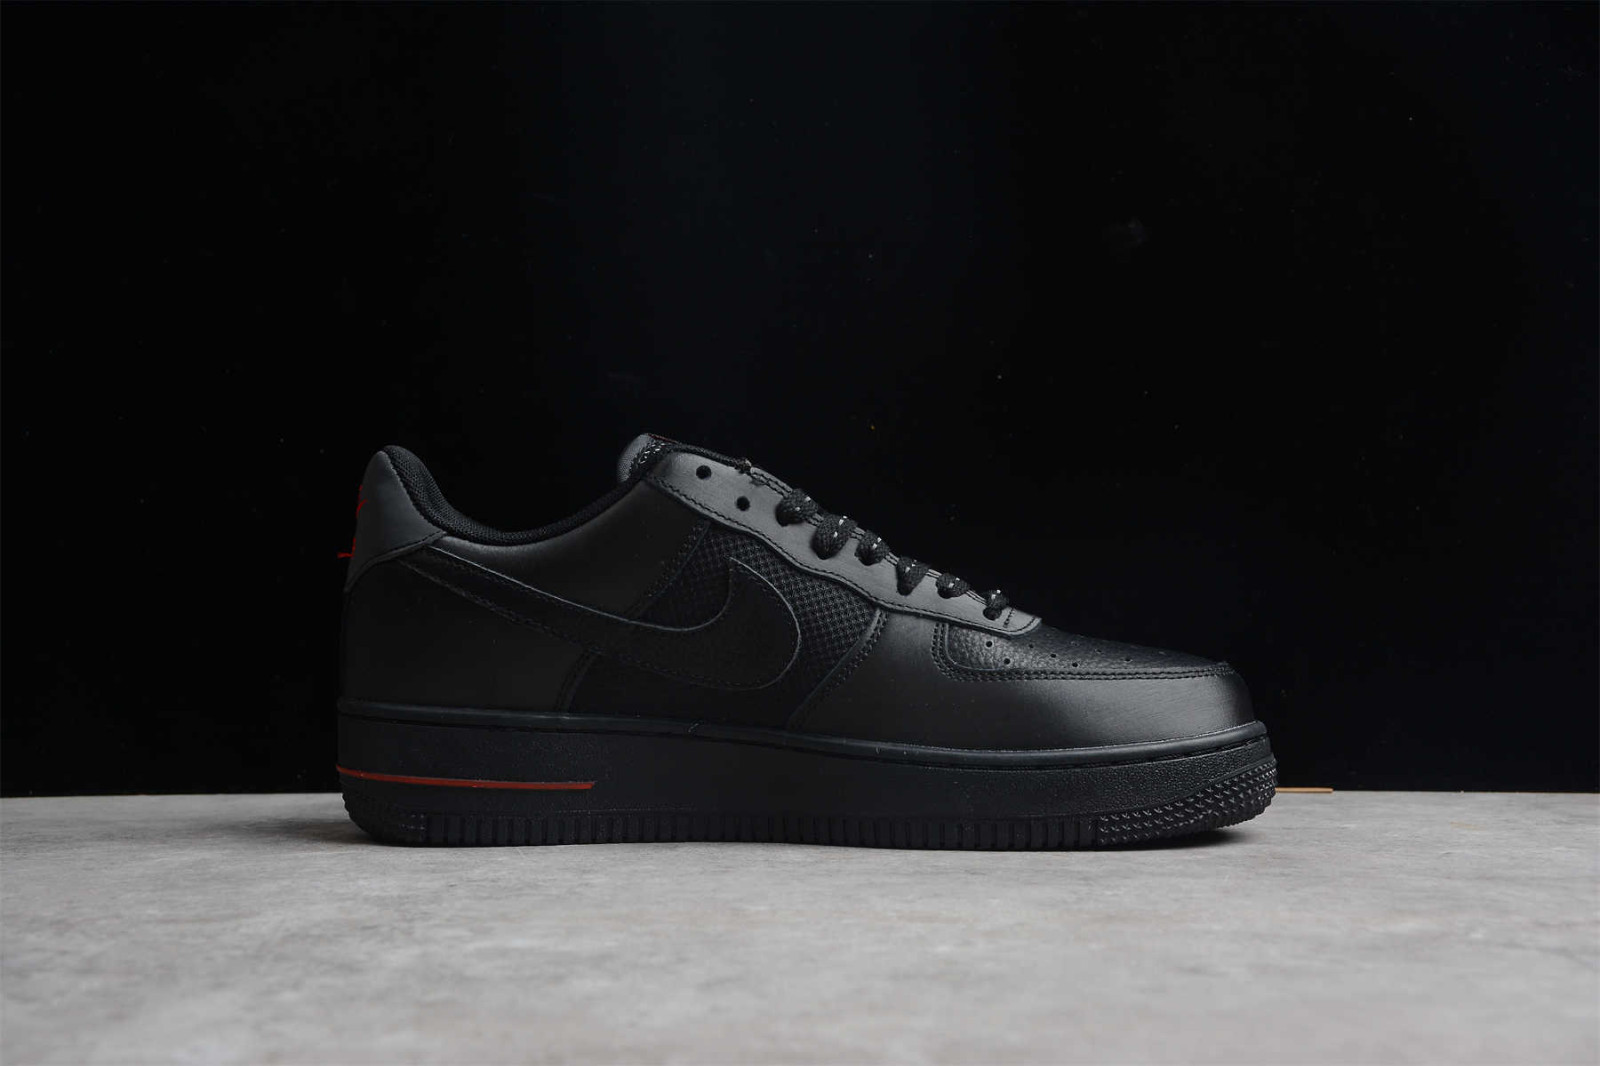 001 - StclaircomoShops Nike rogue Air Force 1 07 Low Black Red Running DO6359 - nike dunk bear pack for sale free template